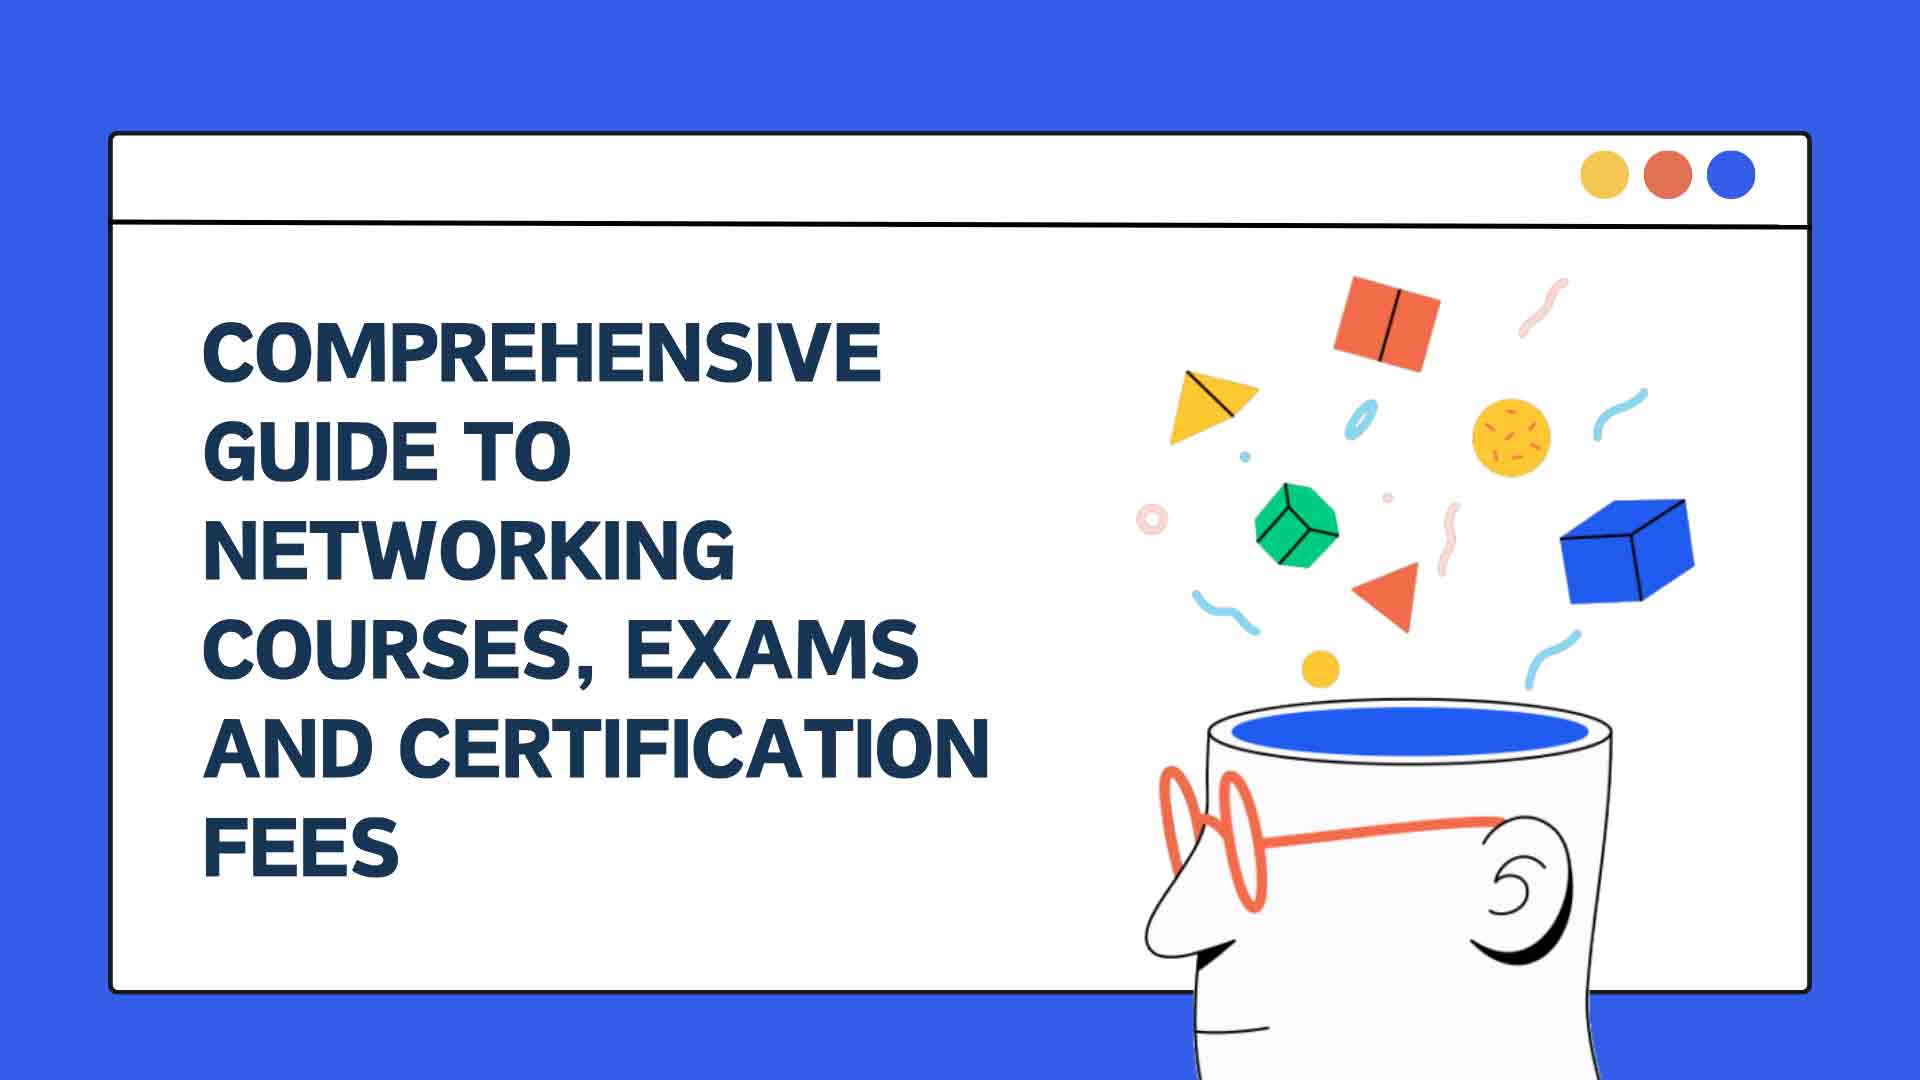 Comprehensive Guide to Networking Courses, Exams and Certification Fees